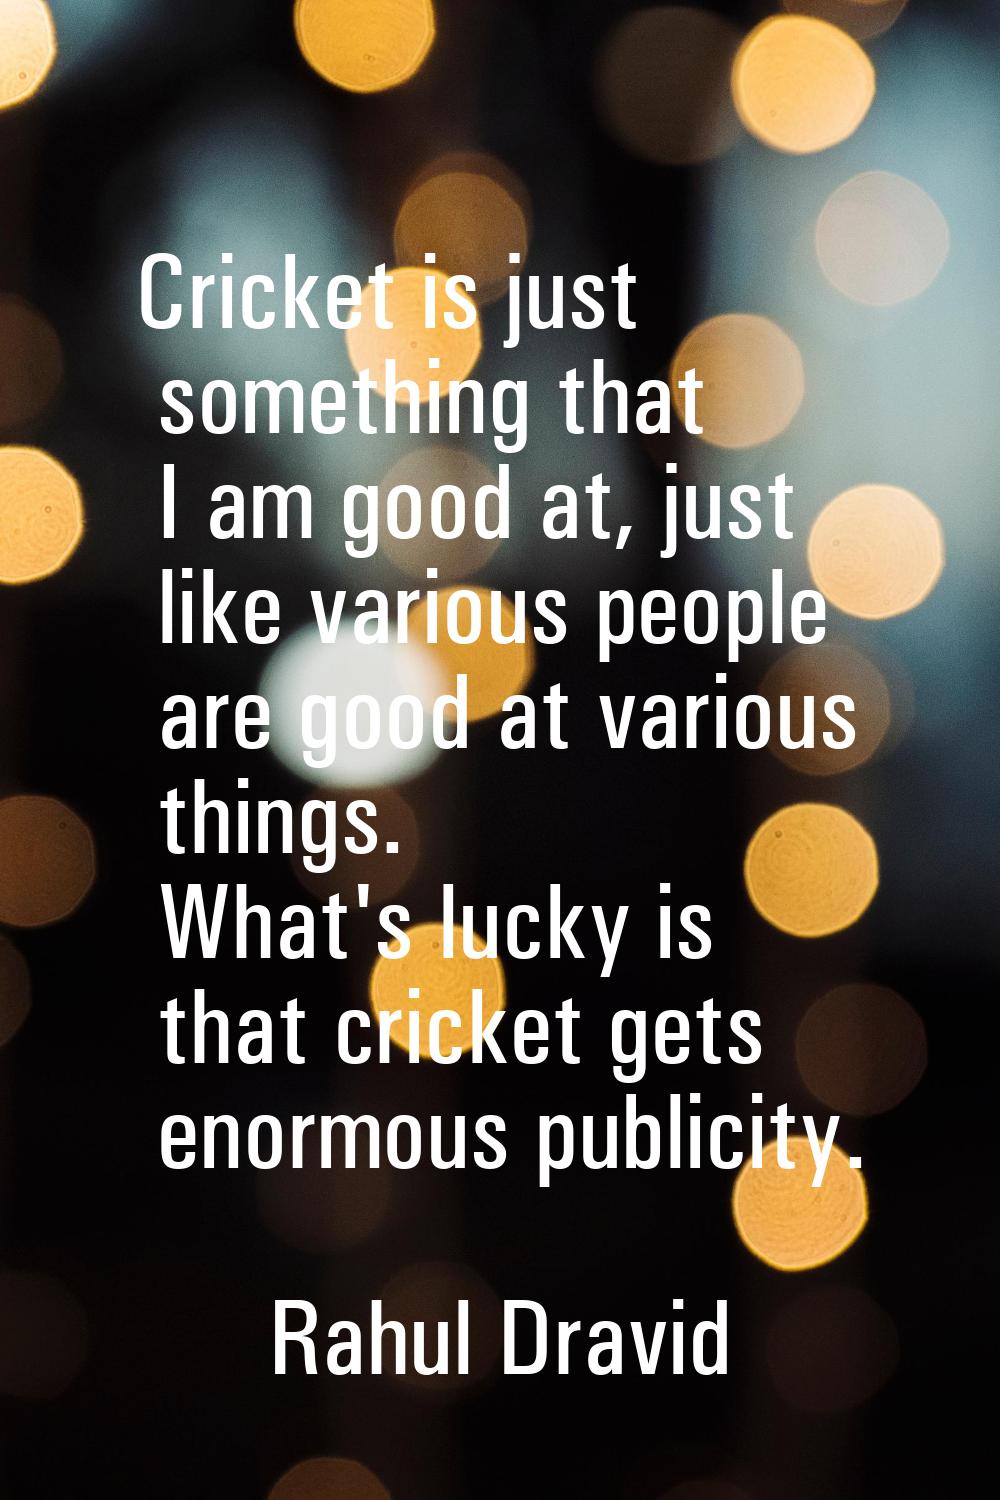 Cricket is just something that I am good at, just like various people are good at various things. W